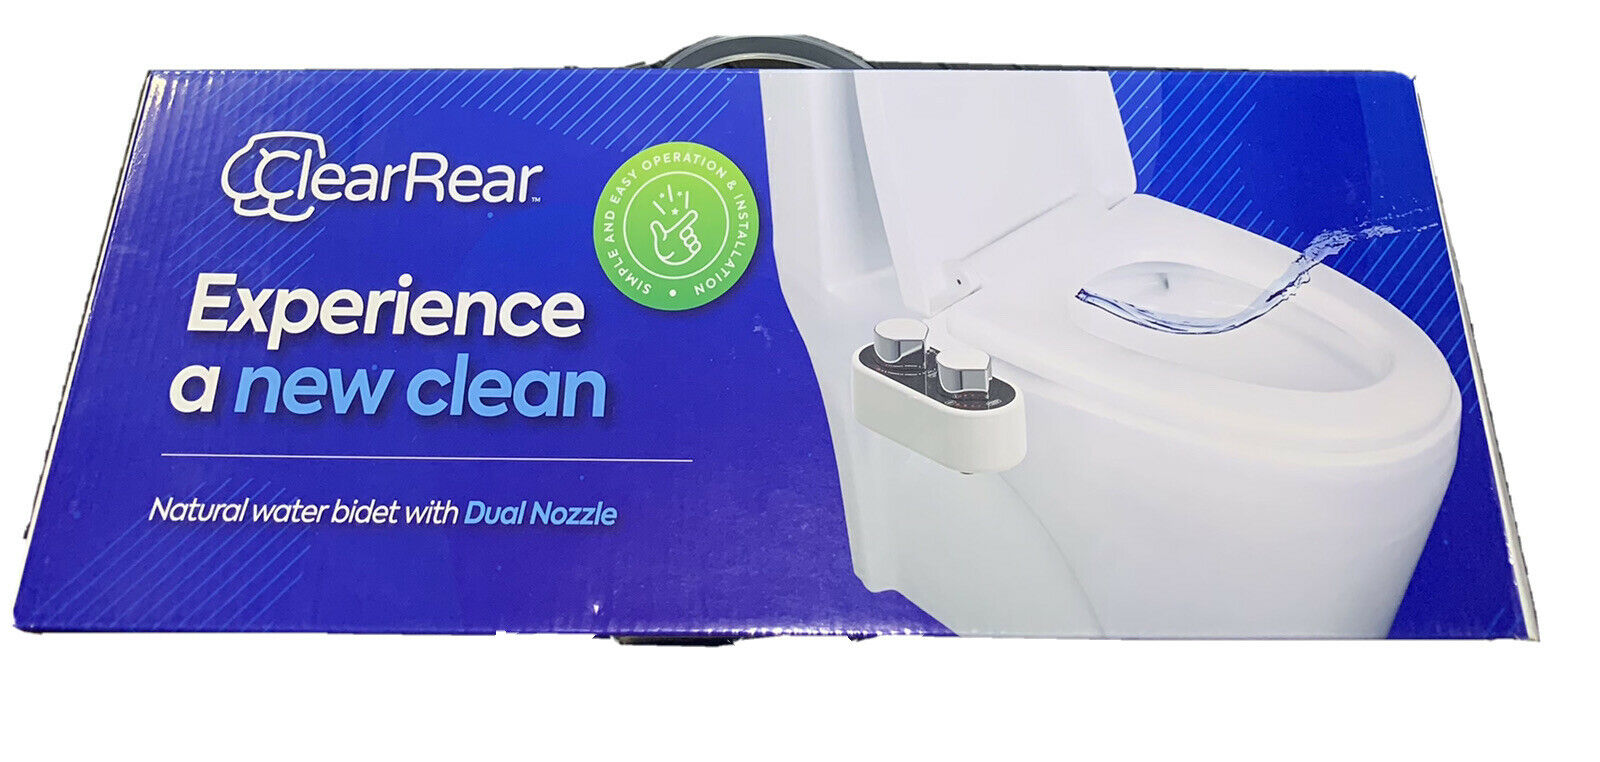 Clear Rear Mechanical Bidet Sprayer With Self Cleaning Nozzle Easy Set-up